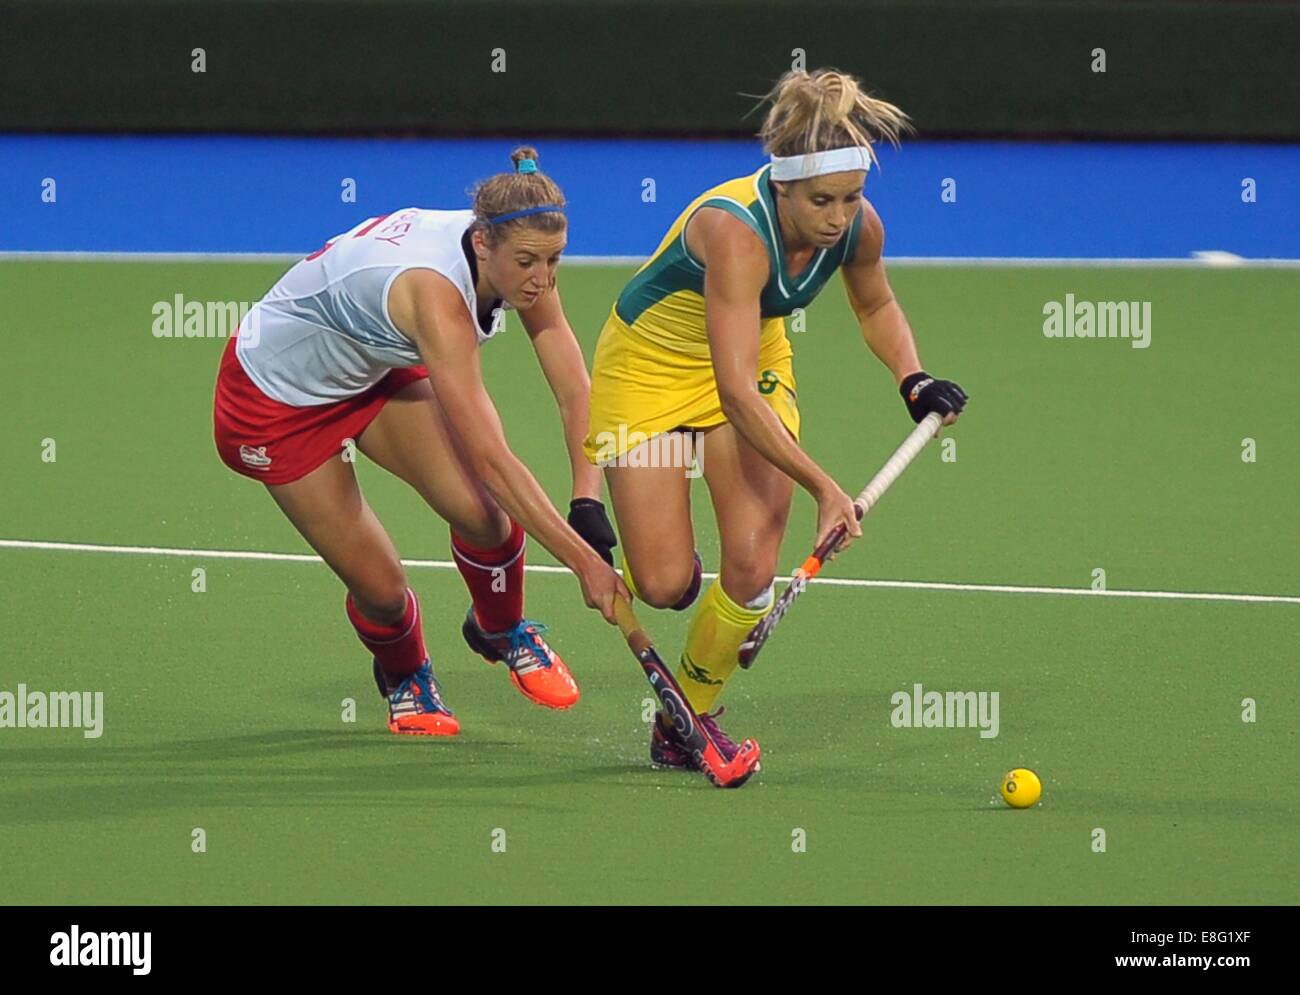 Lily Owsley (FRA) et Ashleigh Nelson (AUS). Australie (AUS) v Angleterre (ENG). Womens médaille d'or. Le Hockey. National Glasgow Banque D'Images